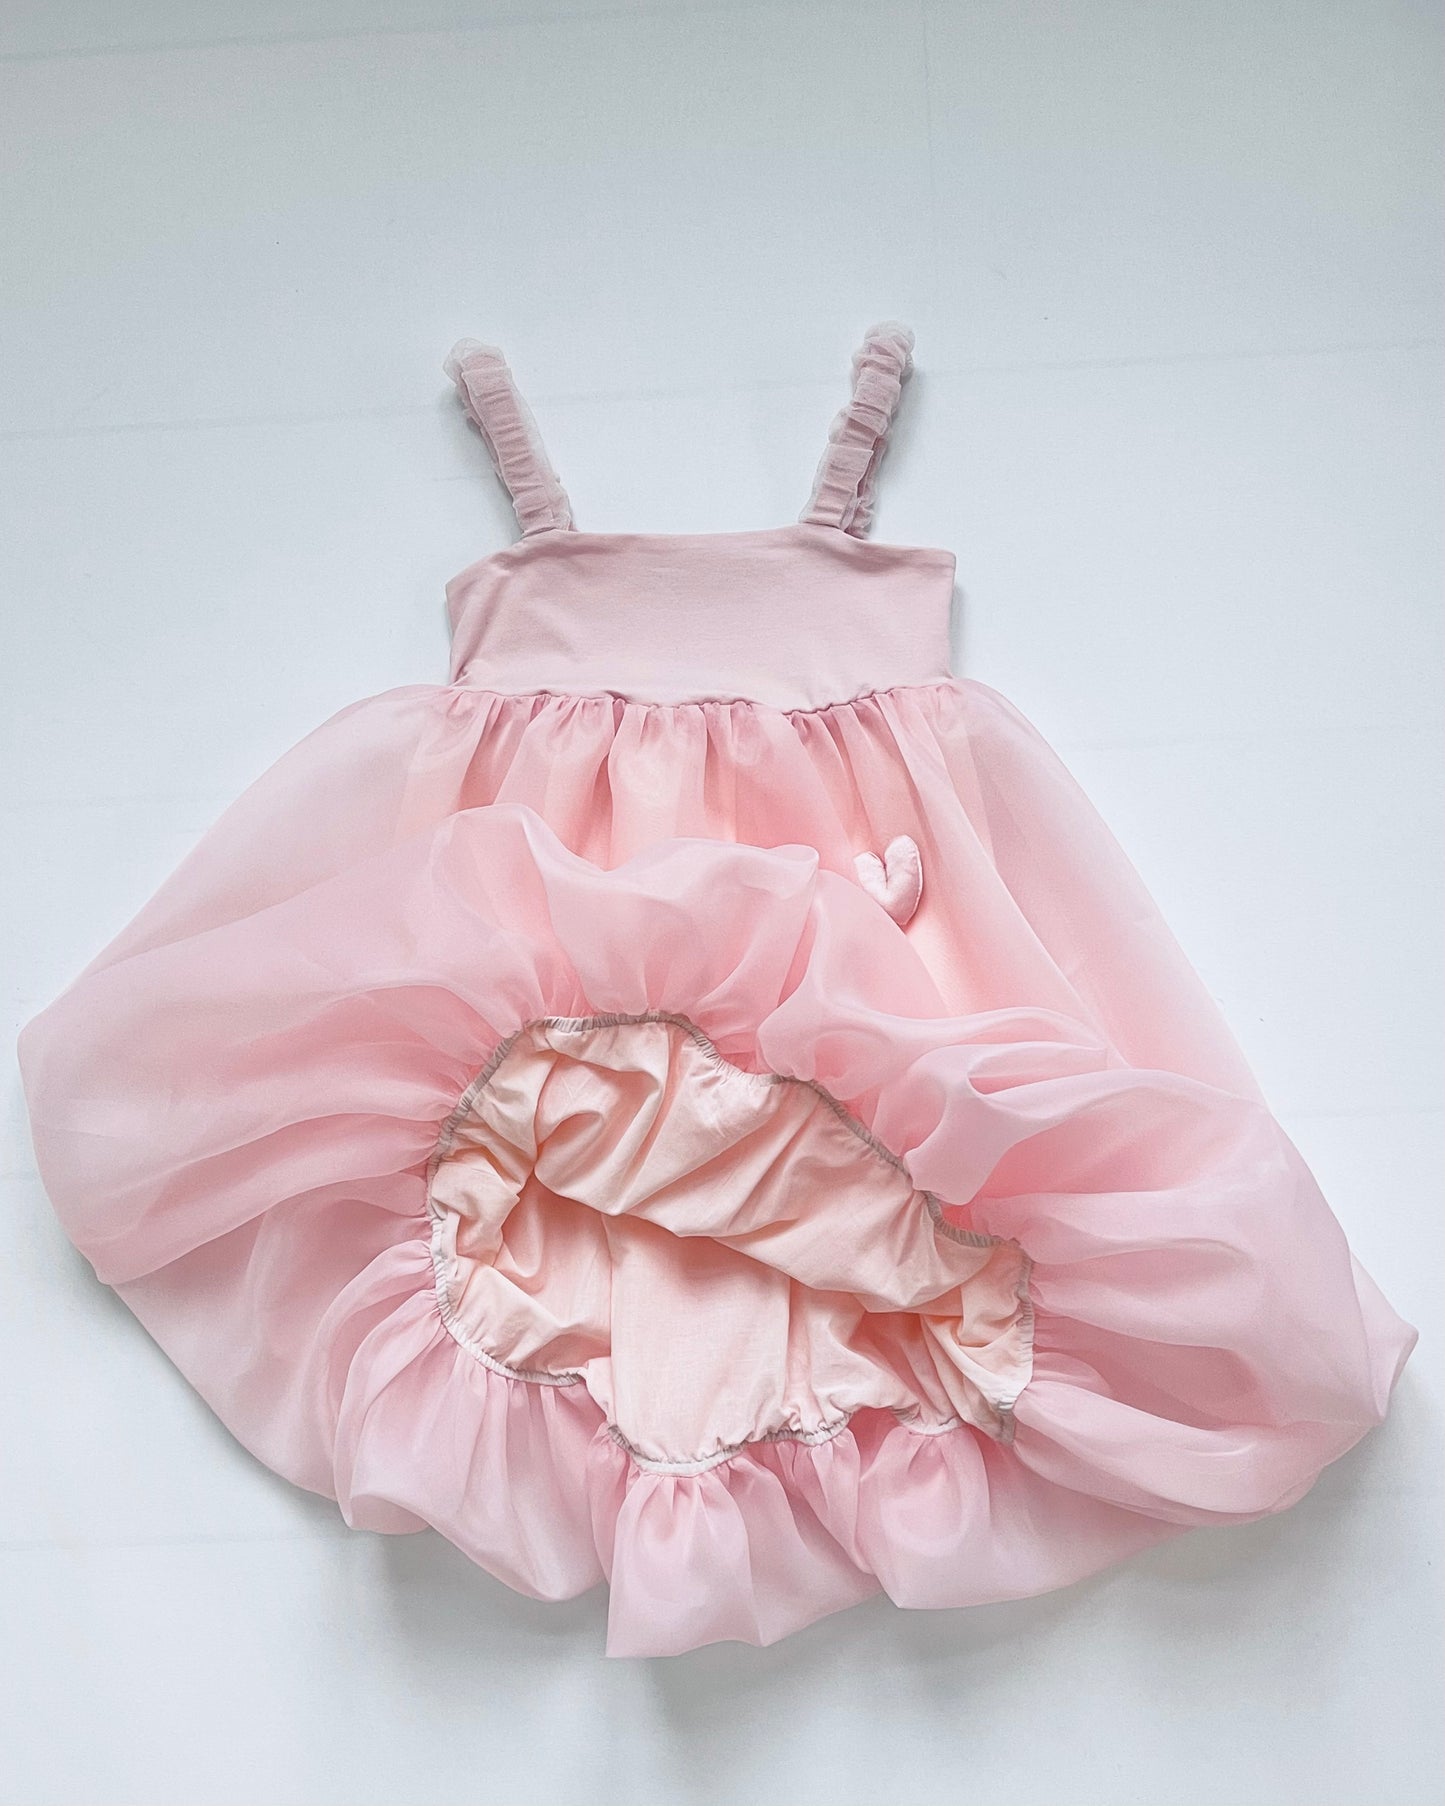 DOLLY WORLD HEART BALLOON ORGANZA DRESS WITH COTTON BODY dollypink